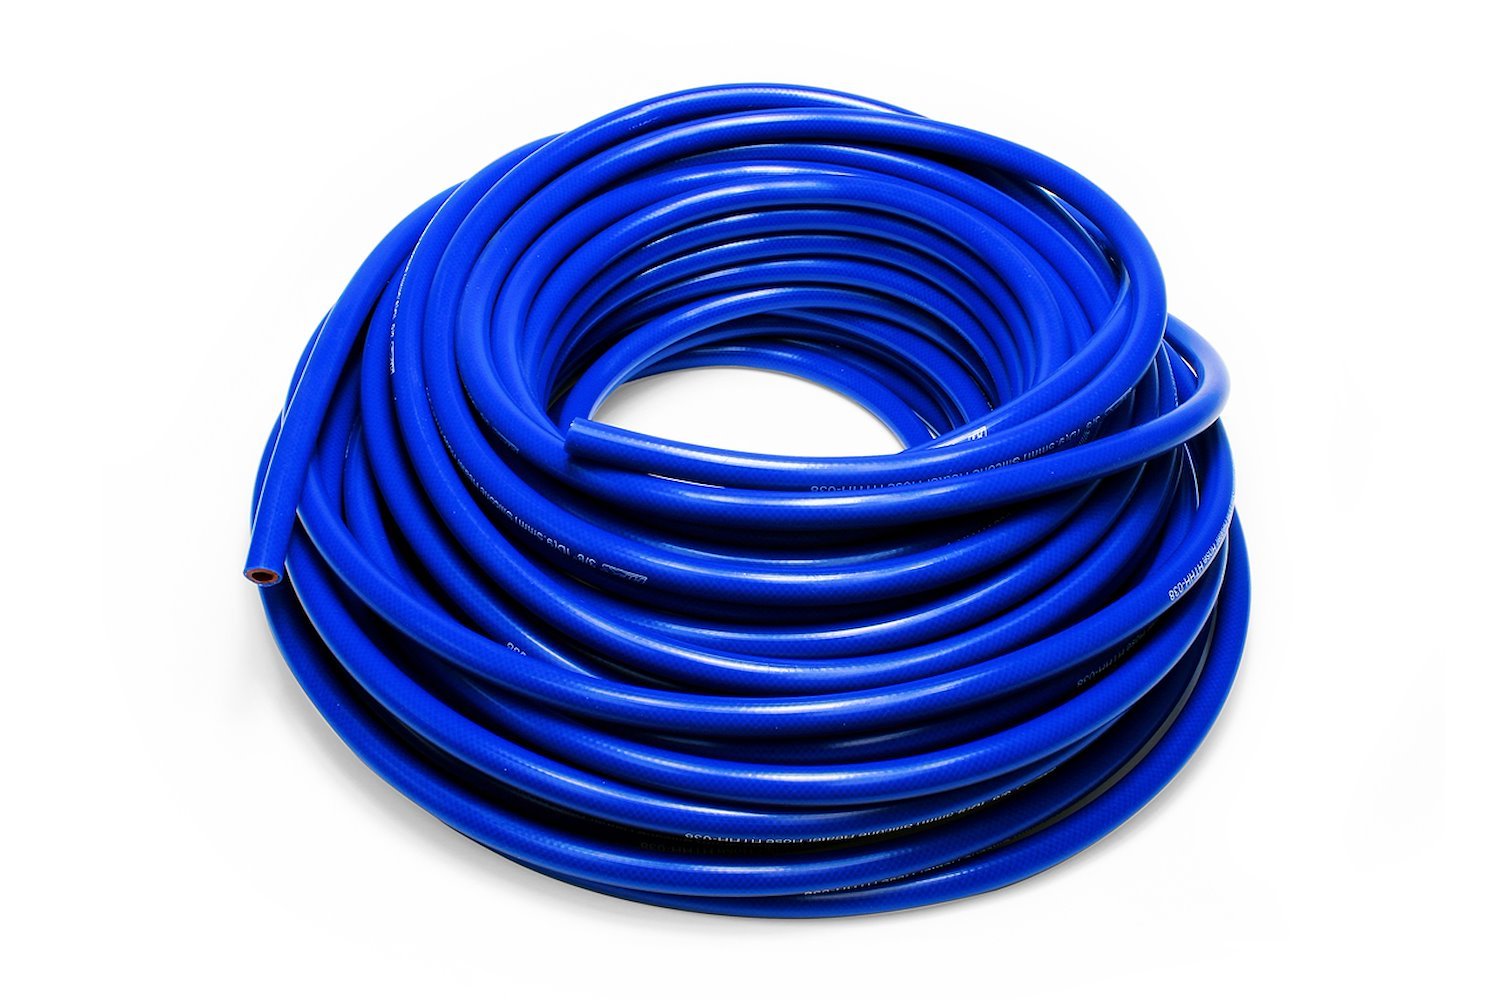 HTHH-013-BLUEx250 Silicone Heater Hose Tubing, High-Temp Reinforced, 1/8 in. ID, 250 ft. Roll, Blue